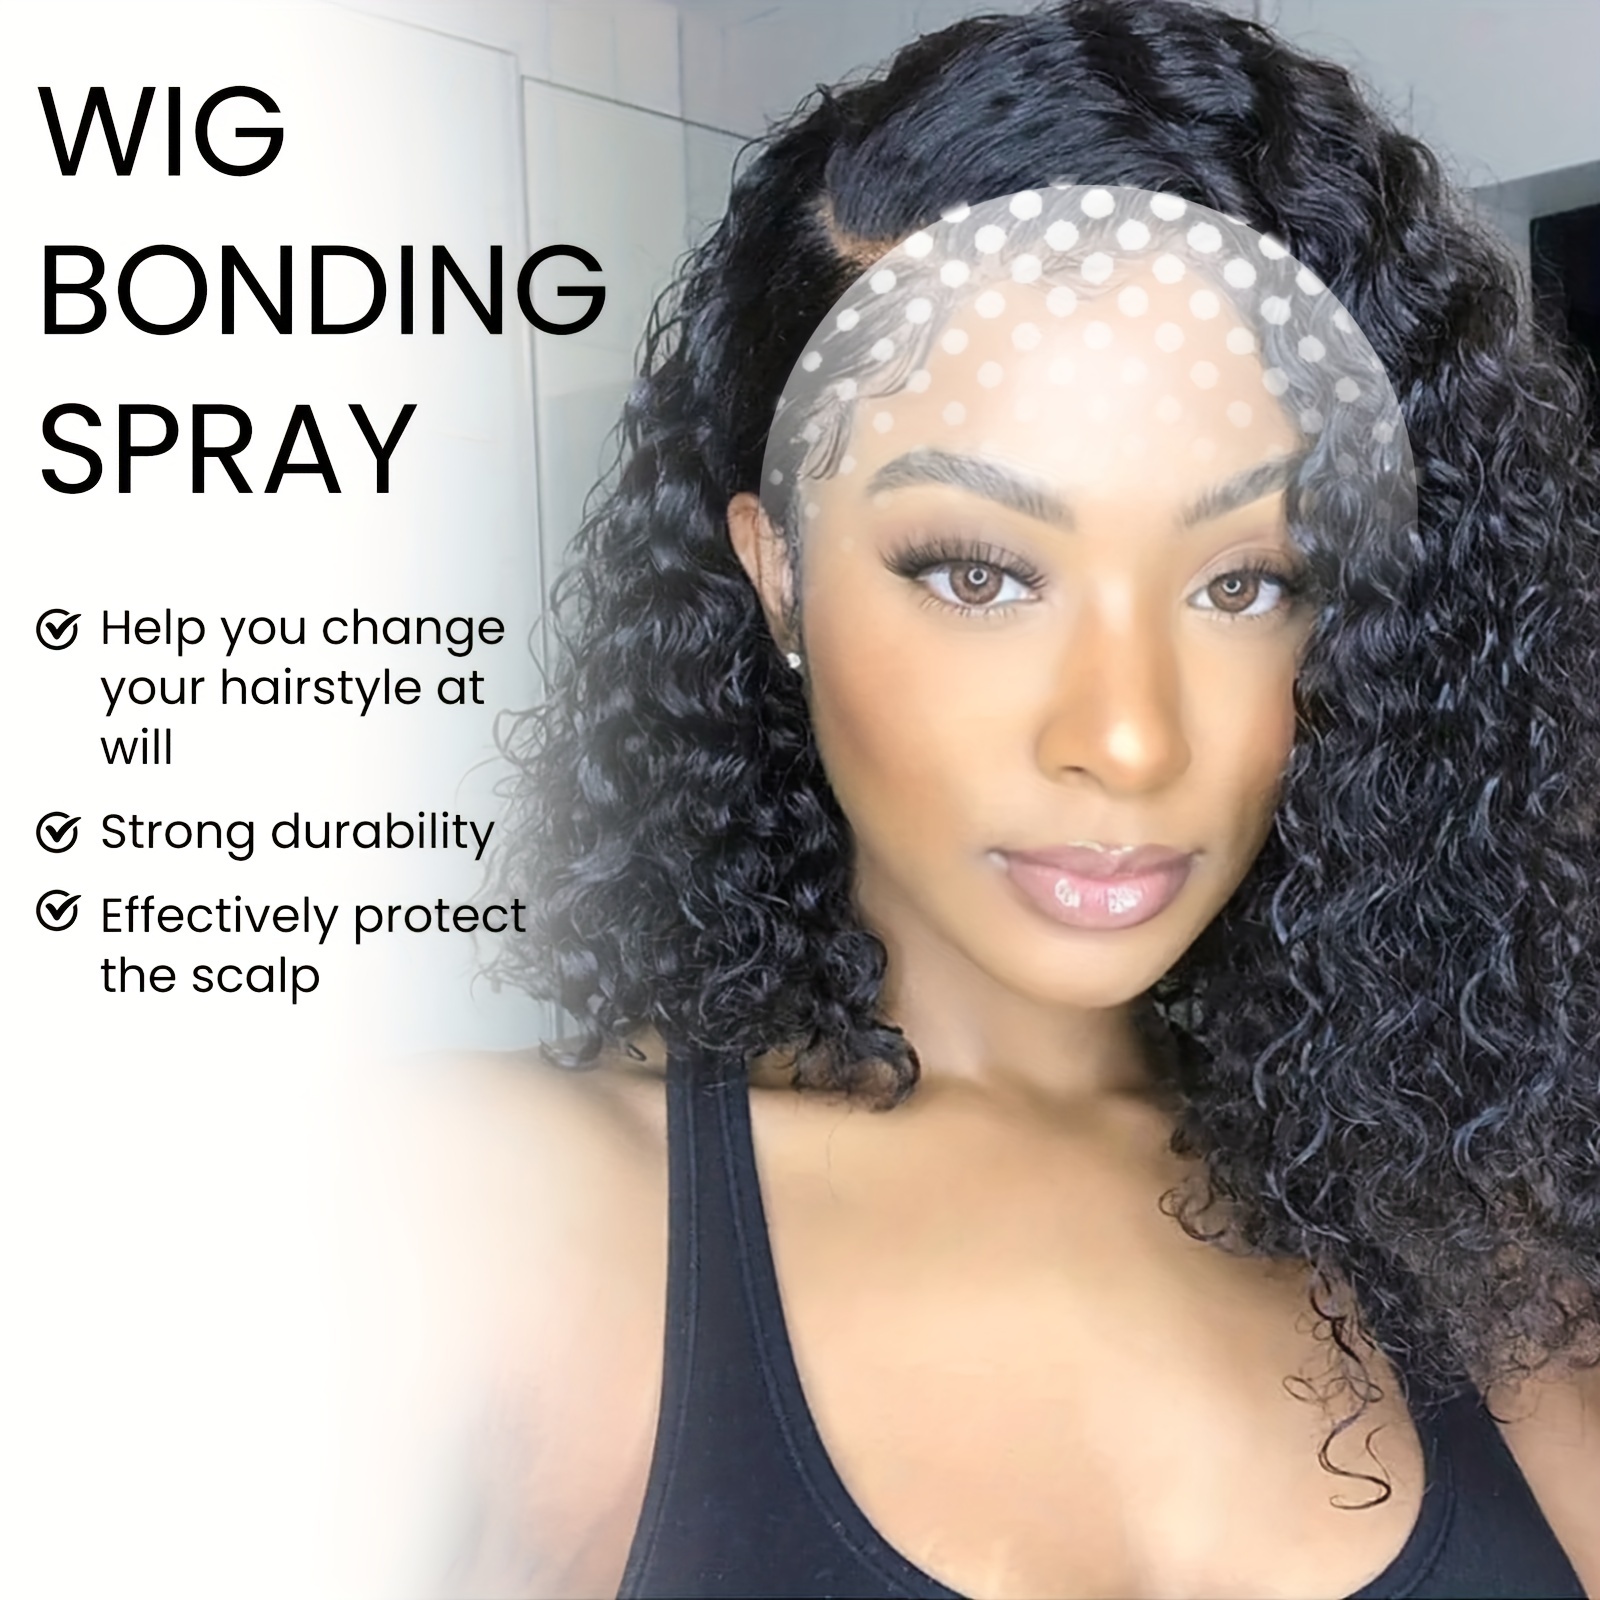 Tips for Securing Your Wig Quickly and Effectively